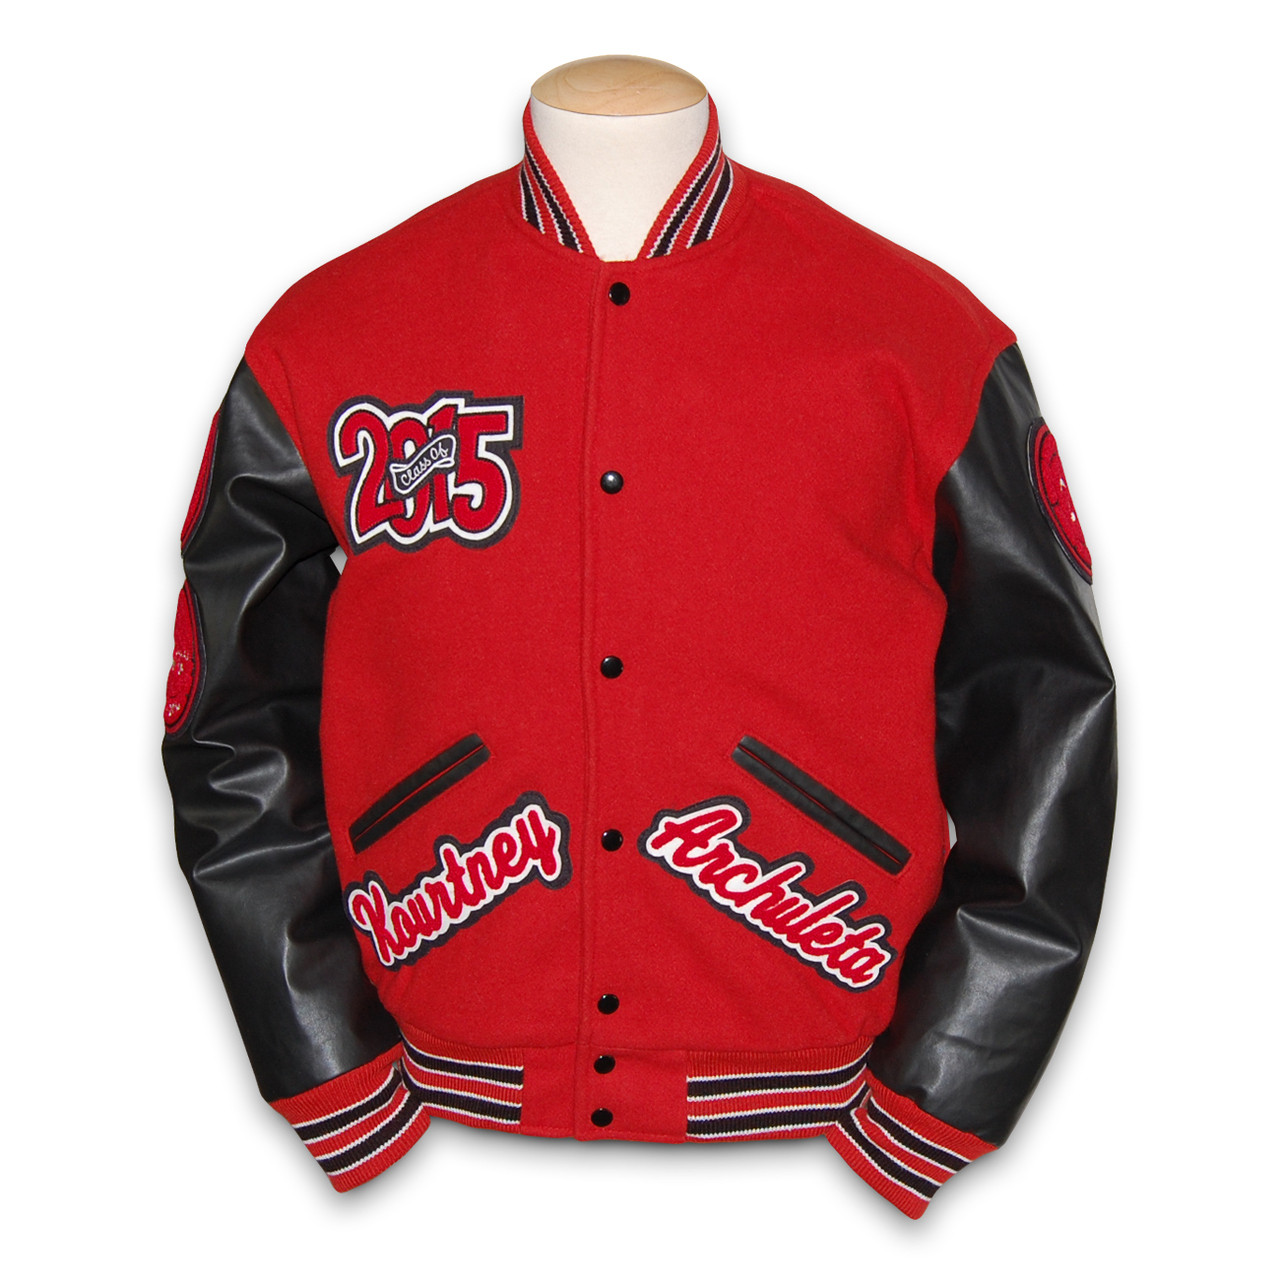 Women's Red Letterman Jacket with White Sleeves